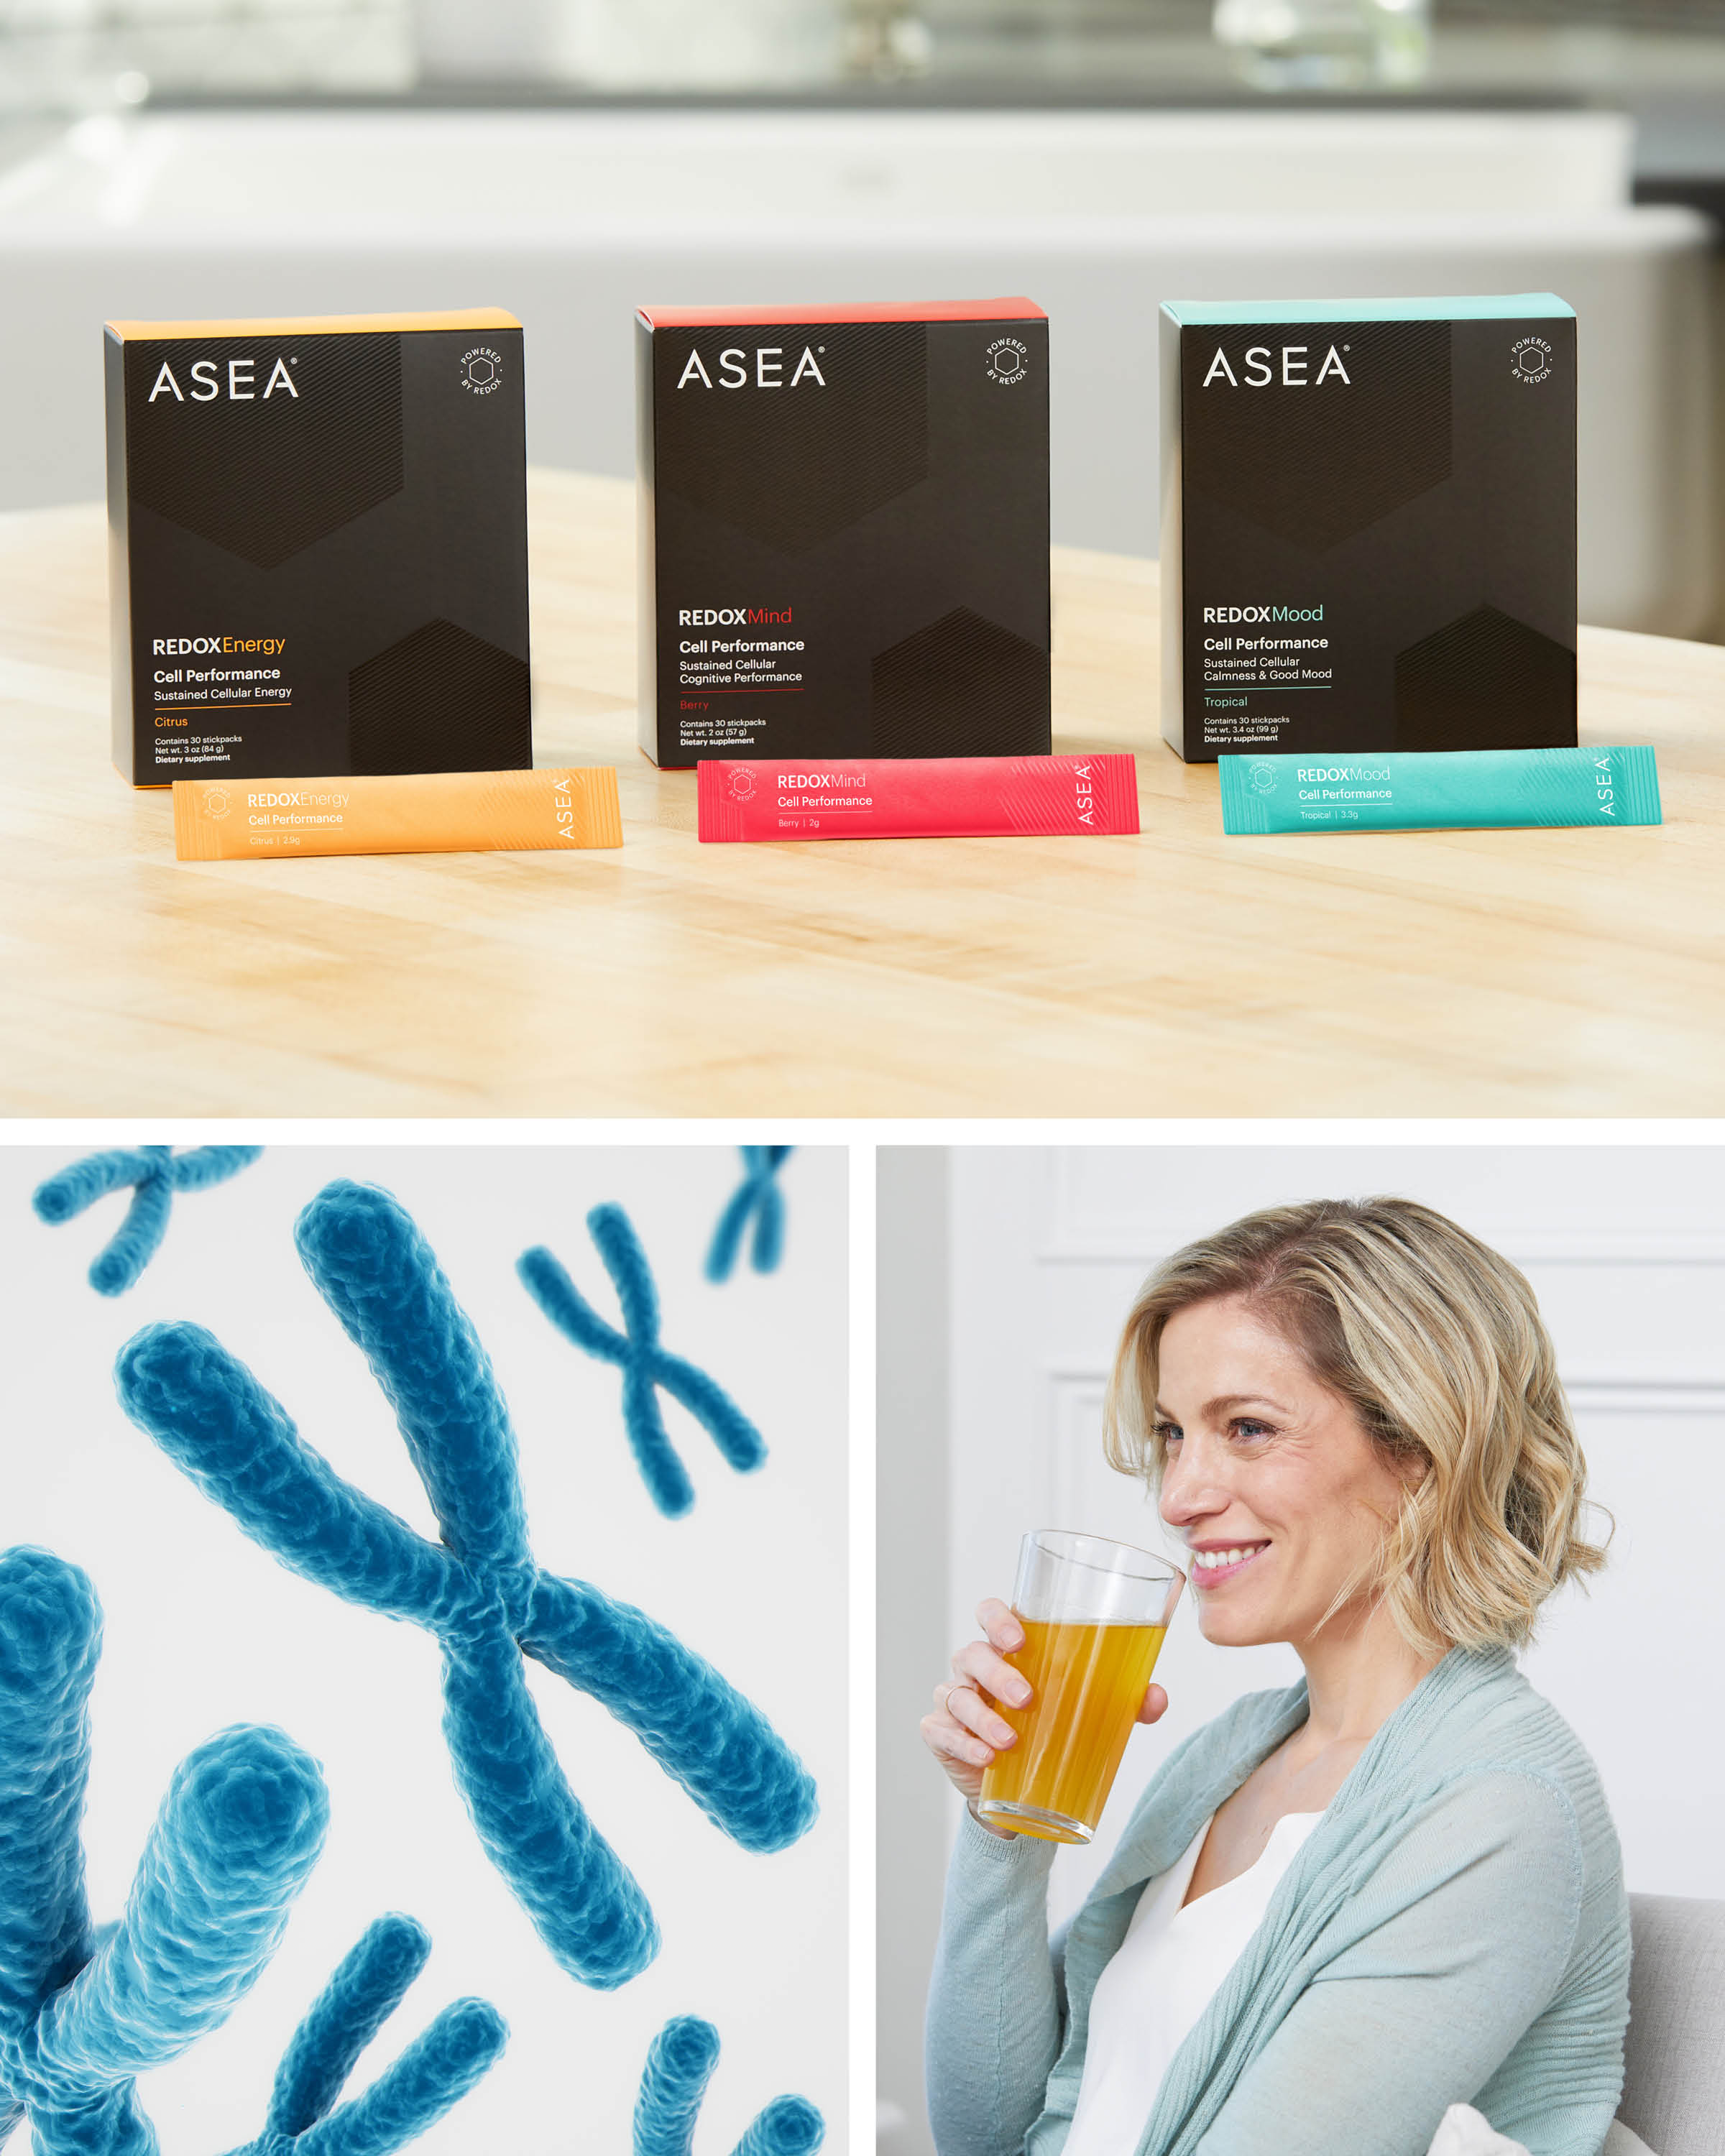 ASEAu00ae announces new cell performance research and its benefits for telomeres and perimenopause.